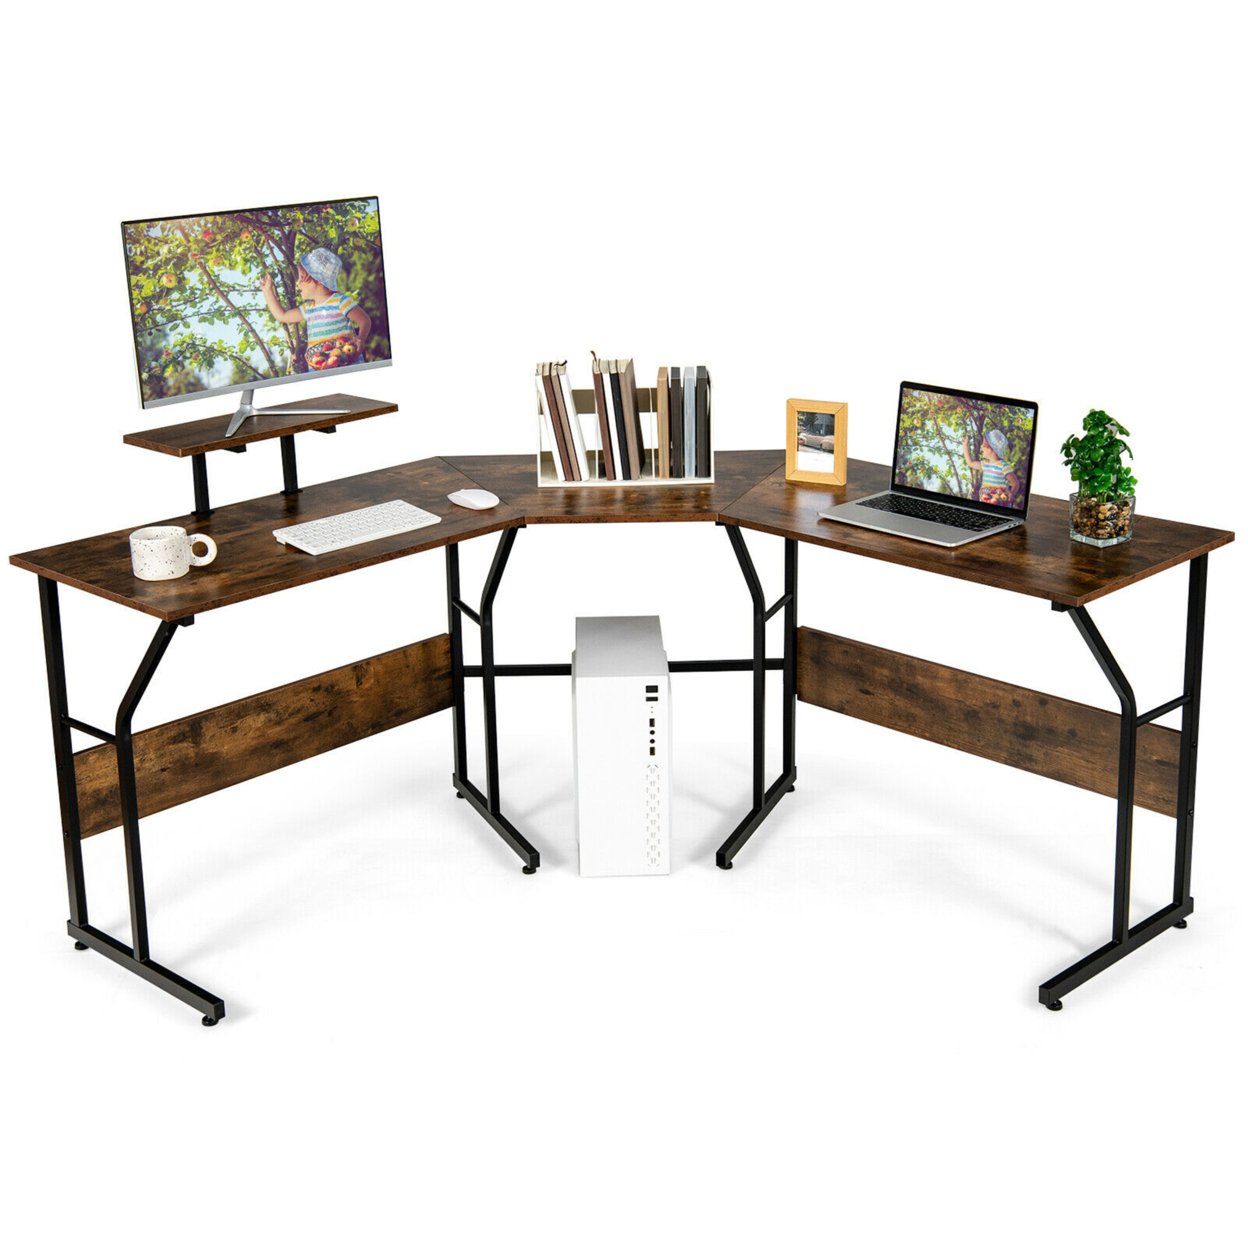 88.5'' L Shaped Reversible Computer Desk 2 Person Long Table Monitor Stand - Rustic Brown